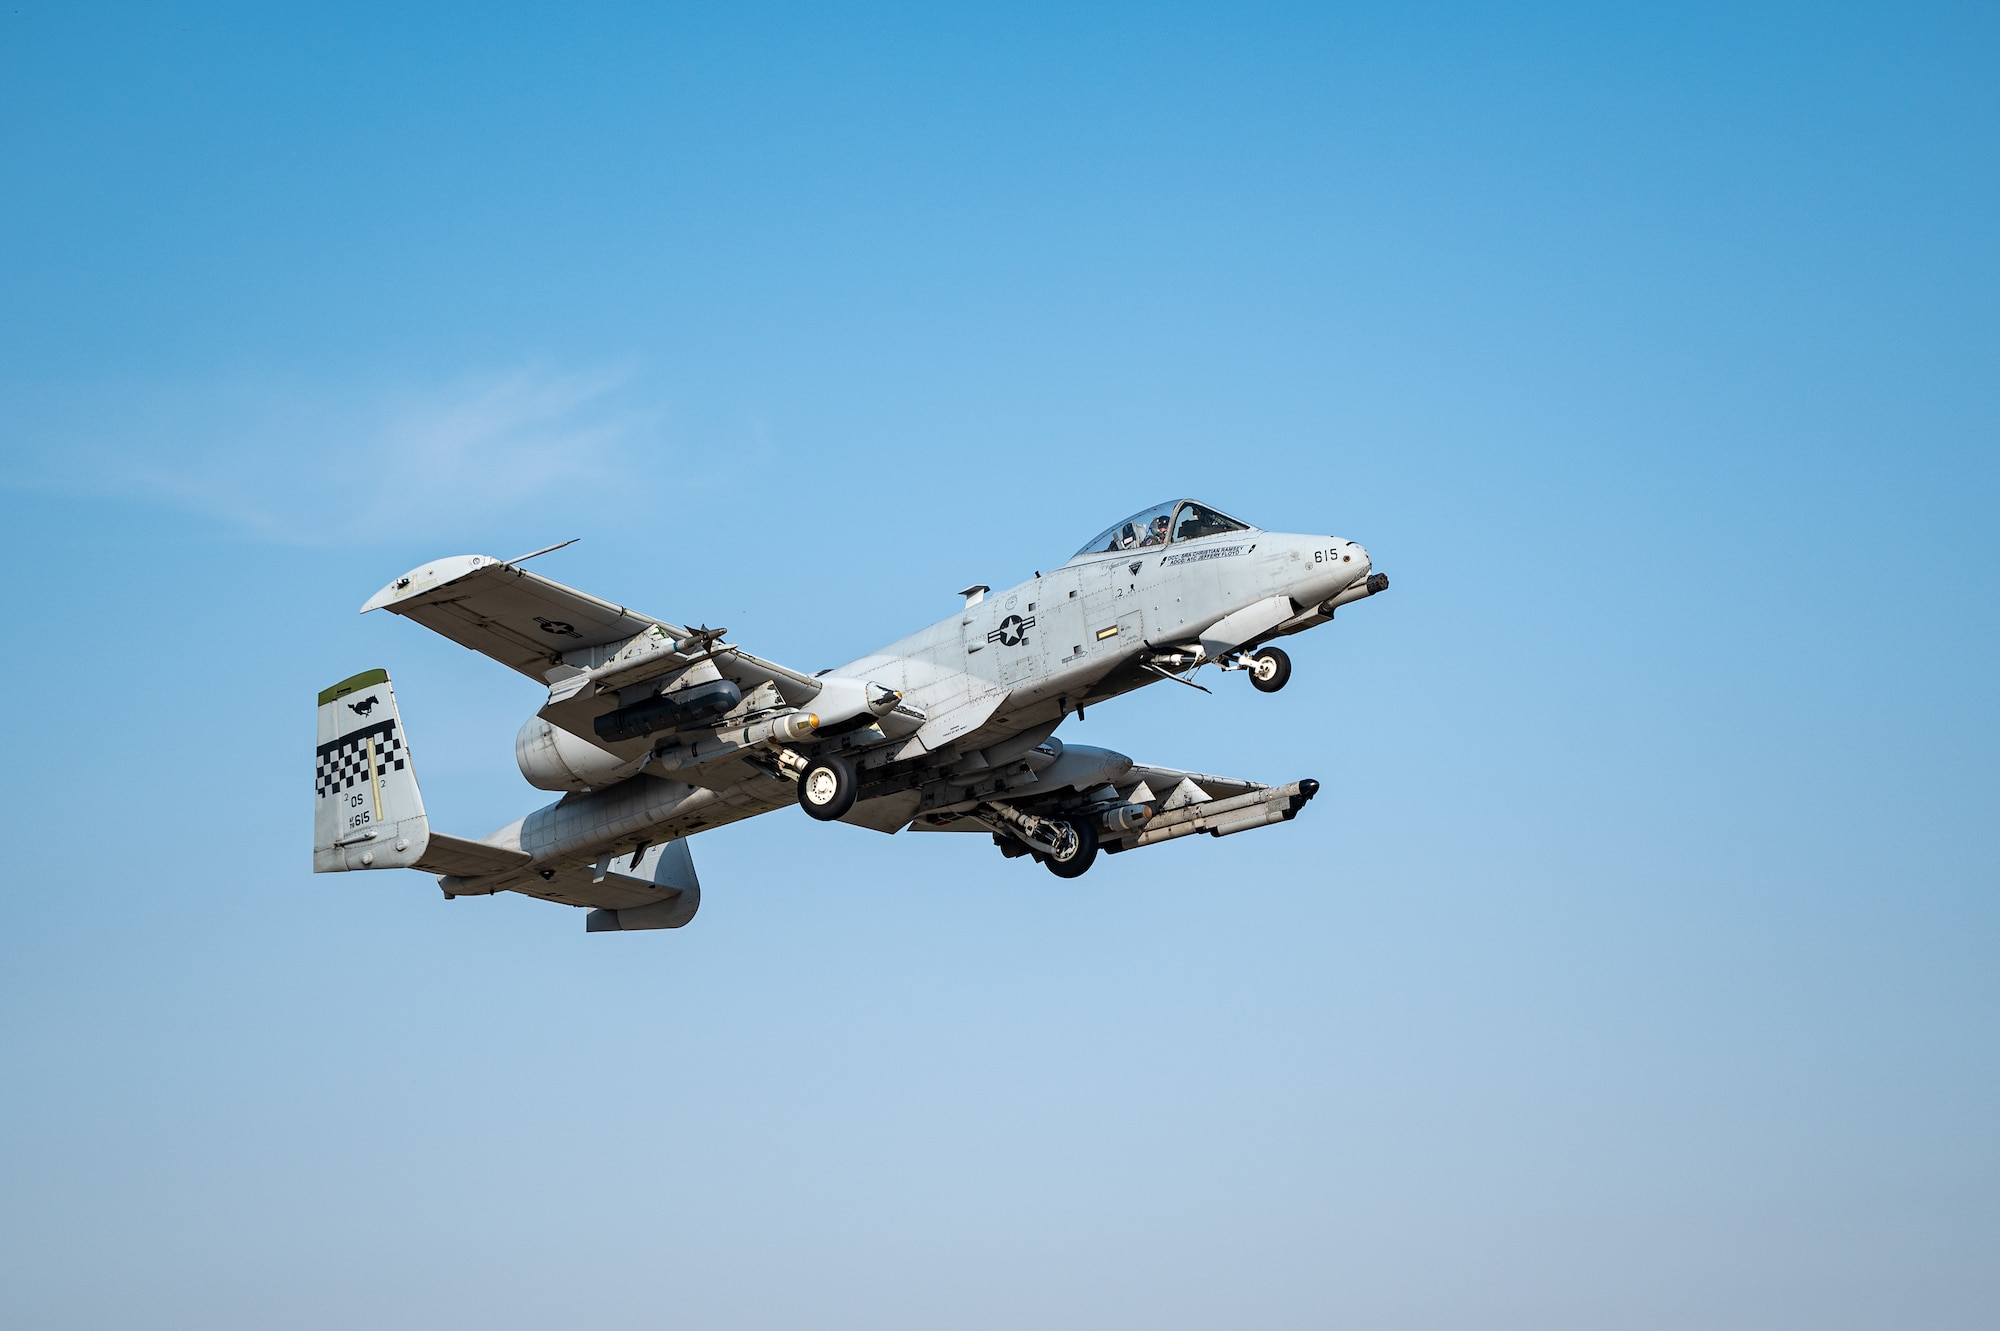 A U.S. Air Force A-10C Thunderbolt II assigned to the 25th Fighter Squadron takes
off at Osan Air Base, Republic of Korea, Oct. 30, 2023. The A-10 was designed for close air support of friendly ground troops, engaging armored vehicles and tanks, and providing quick-action support against enemy ground forces. At the 51st Fighter Wing, the 25th FS and the A-10 play a crucial role in the defense of Osan AB and the ROK. (U.S. Air Force photo by Staff Sgt. Thomas Sjoberg)